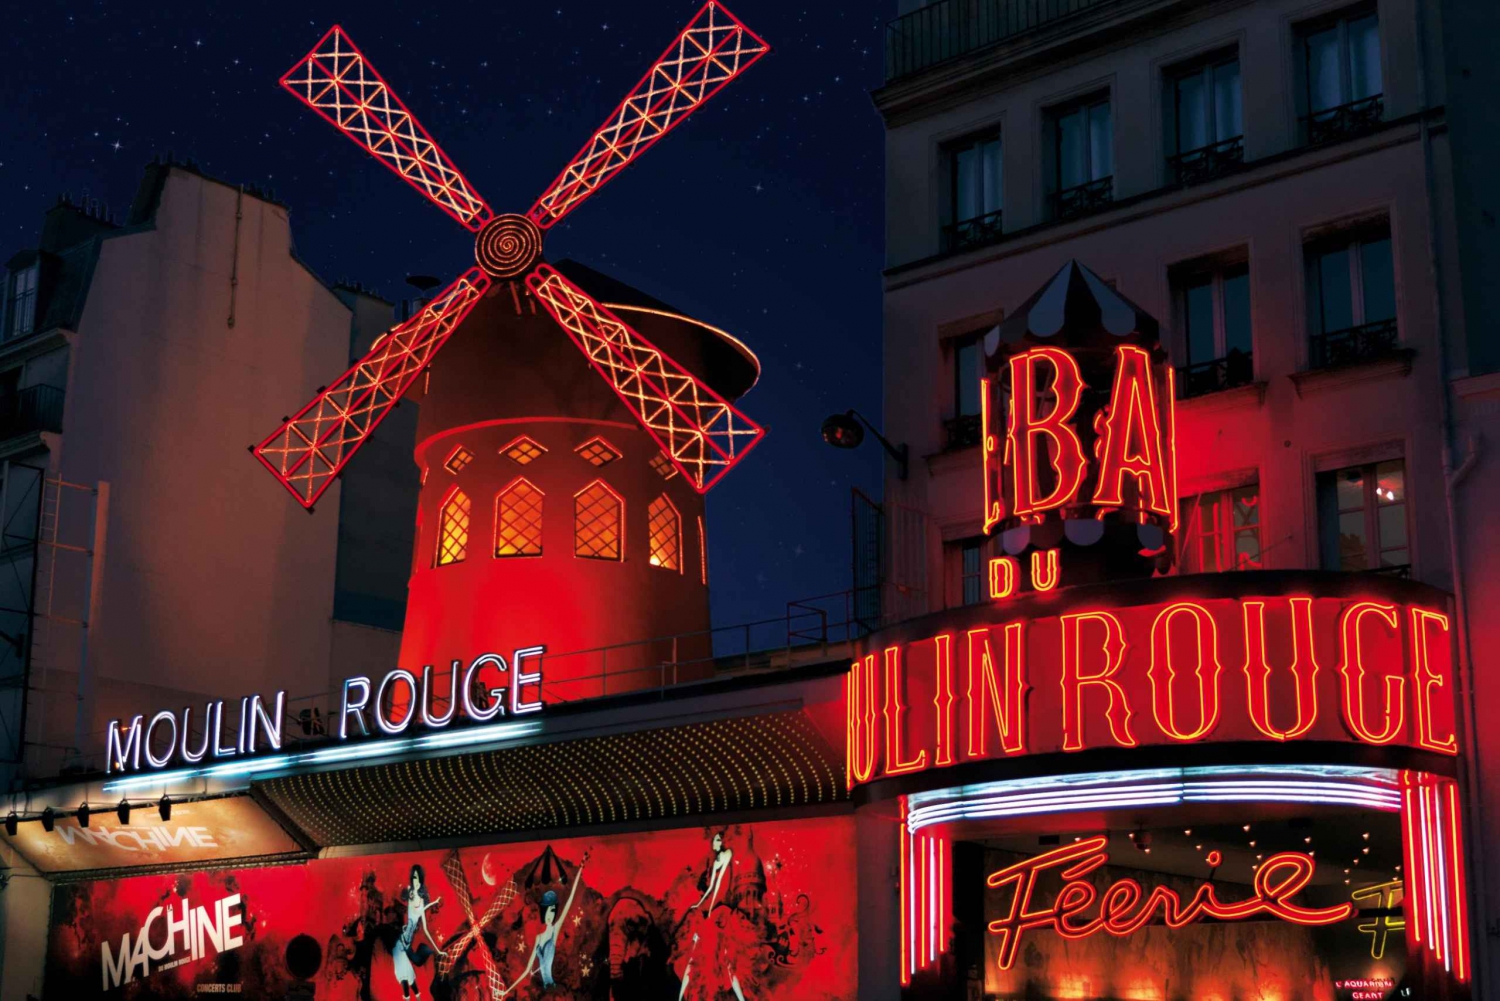 Moulin-Rouge-Winter-Spectacle